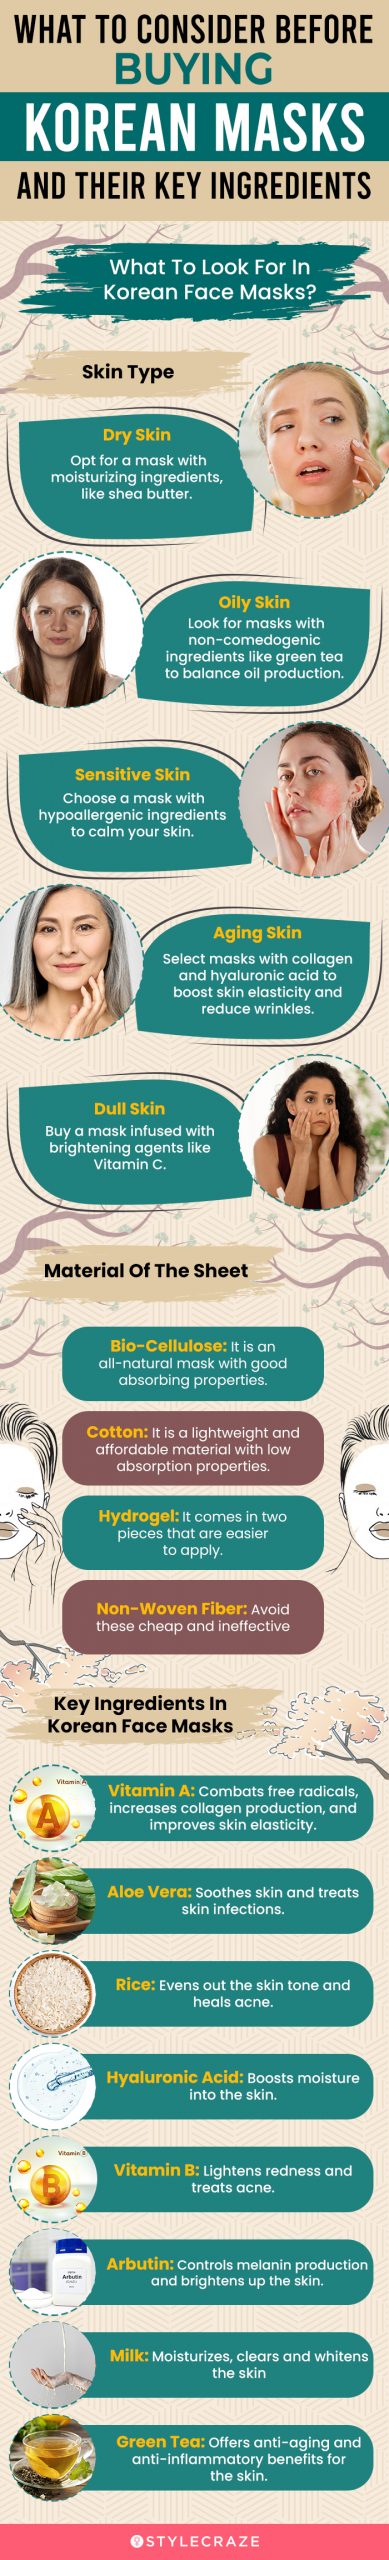 What To Consider Before Buying Korean Masks (infographic)